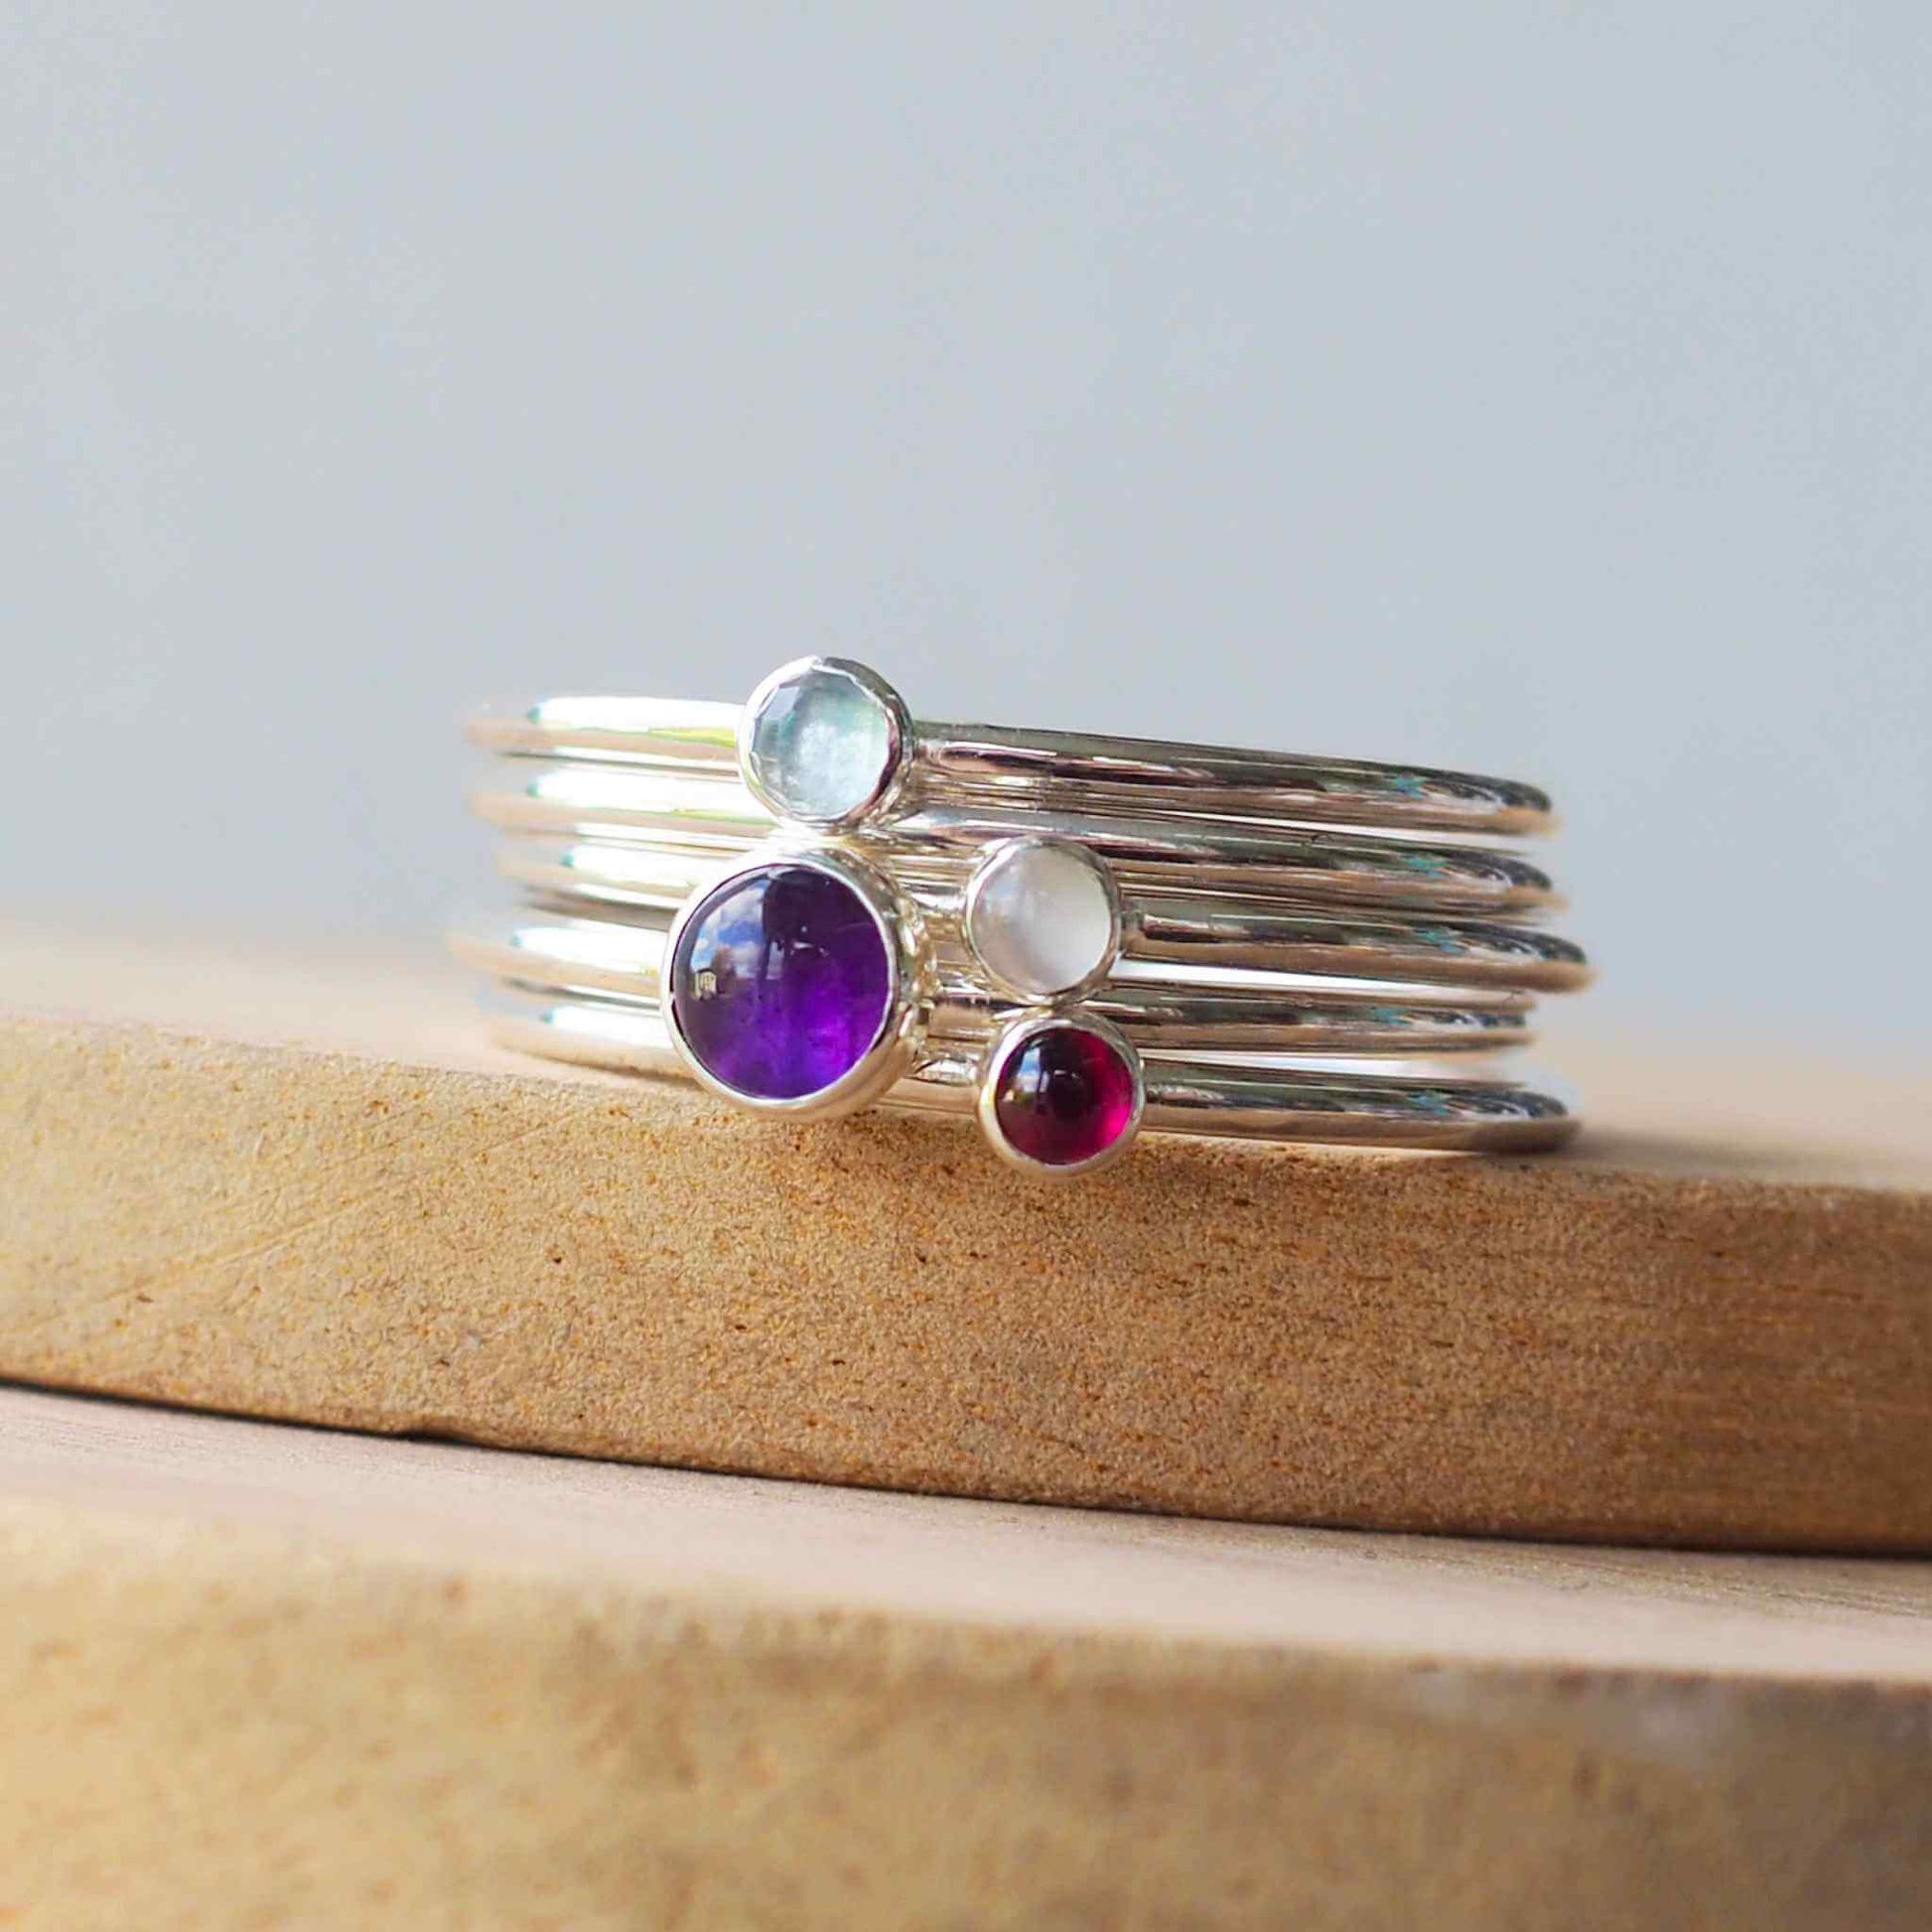 Four ring set in Sterling Silver and mixed gemstones. The rings are minimalist in style with no decoration and feature a single simple round cabochon in a large 5mm Purple Amethyst, smaller 3mm Blue Topaz, White Moonstone, and rich red Garnet. Handmade in Scotland by maram jewellery